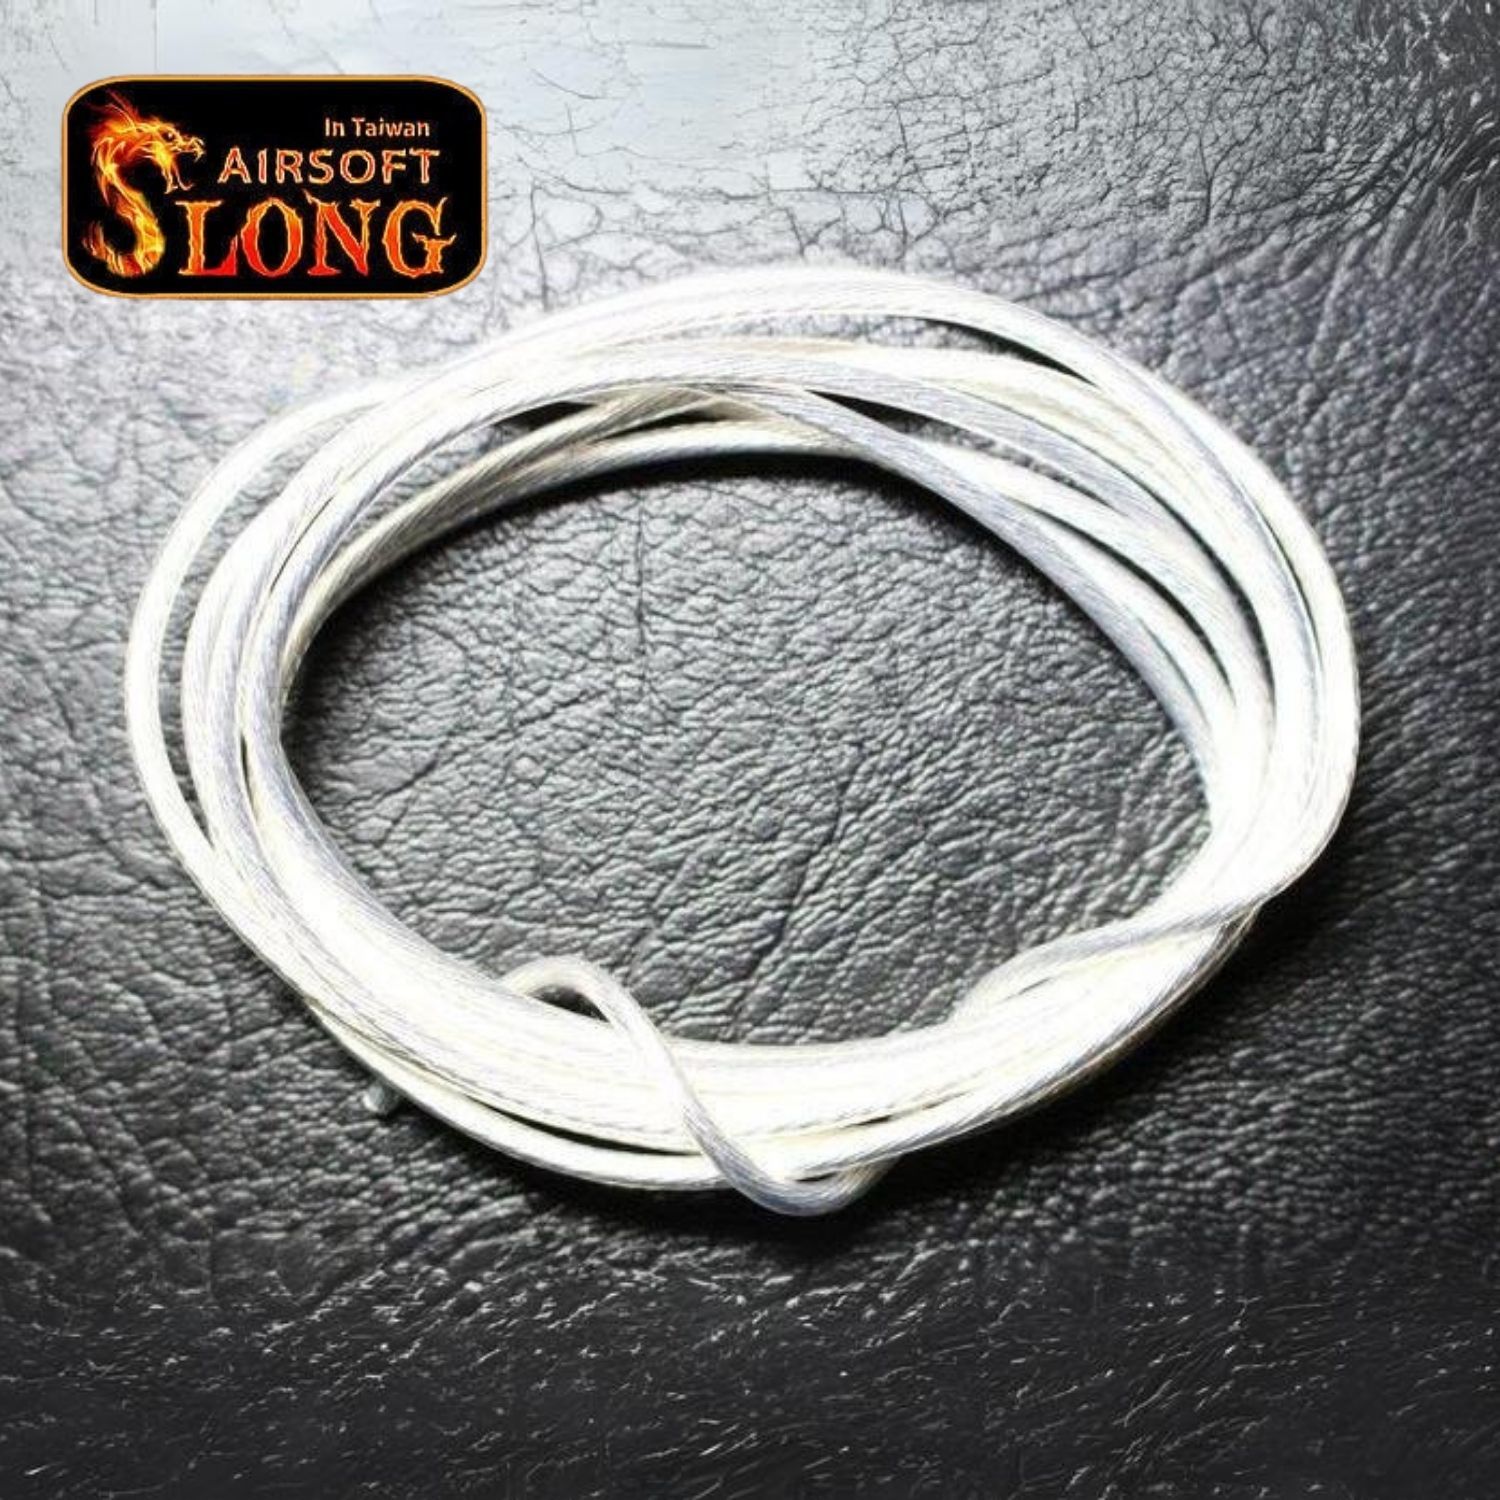 SLONG Airsoft High Current Silver Wire Yanmaz Kablo- SL00134